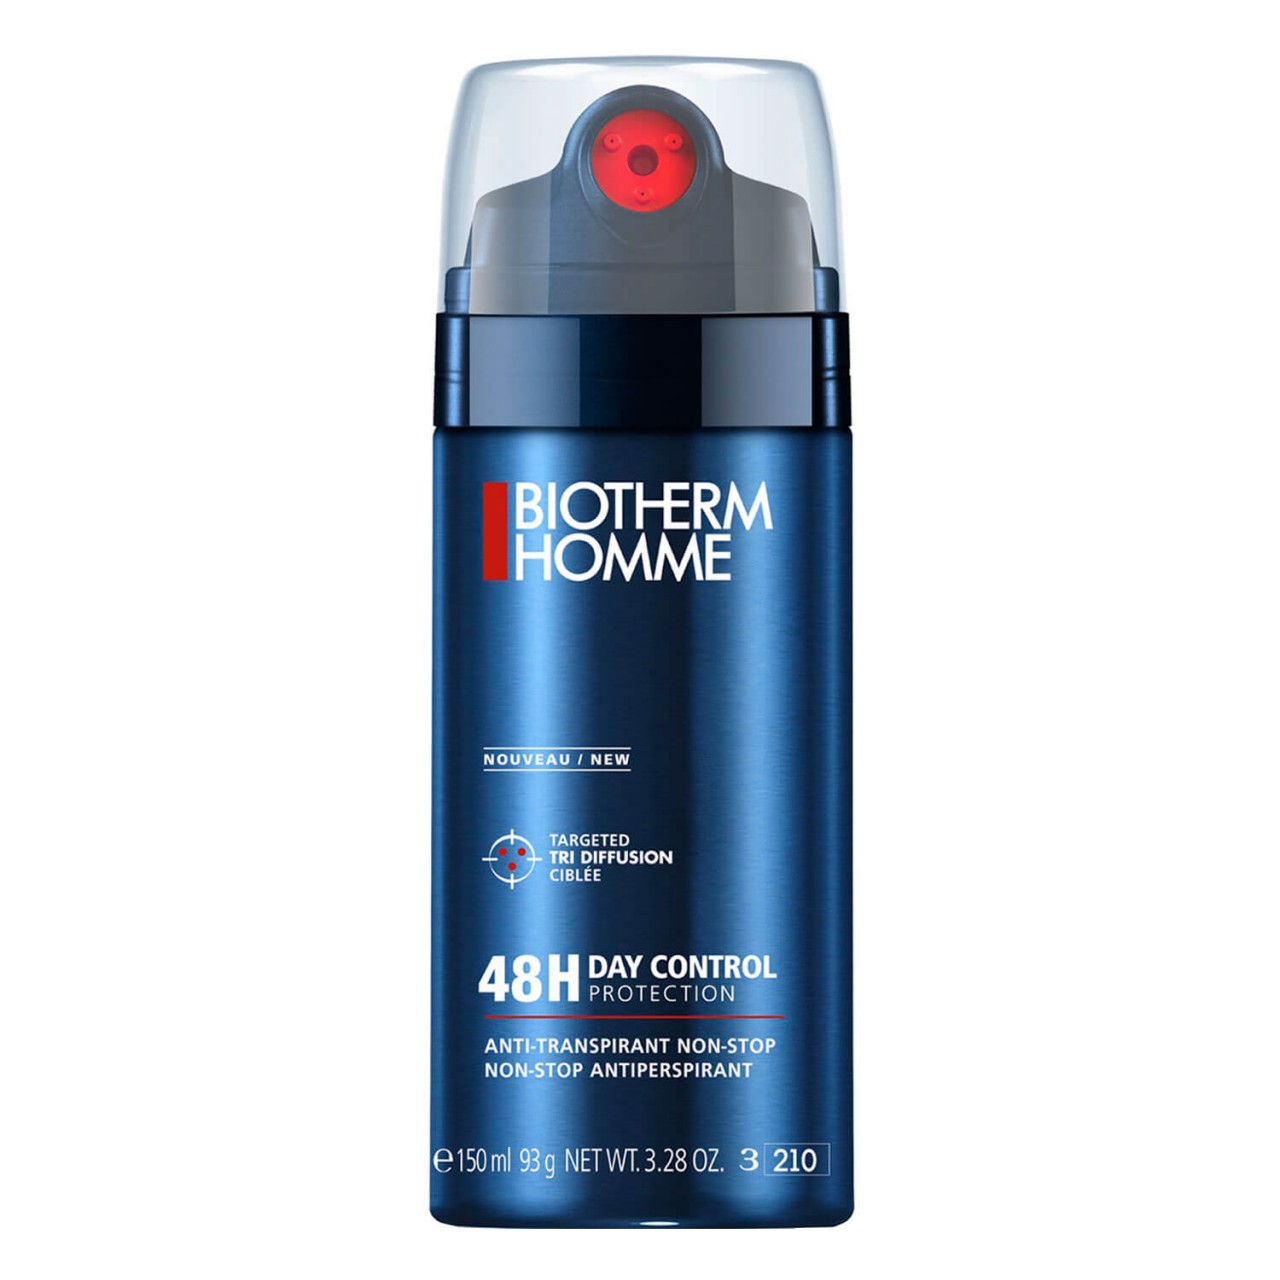 Biotherm Homme - Day Control 48H Extreme Protection Spray von BIOTHERM